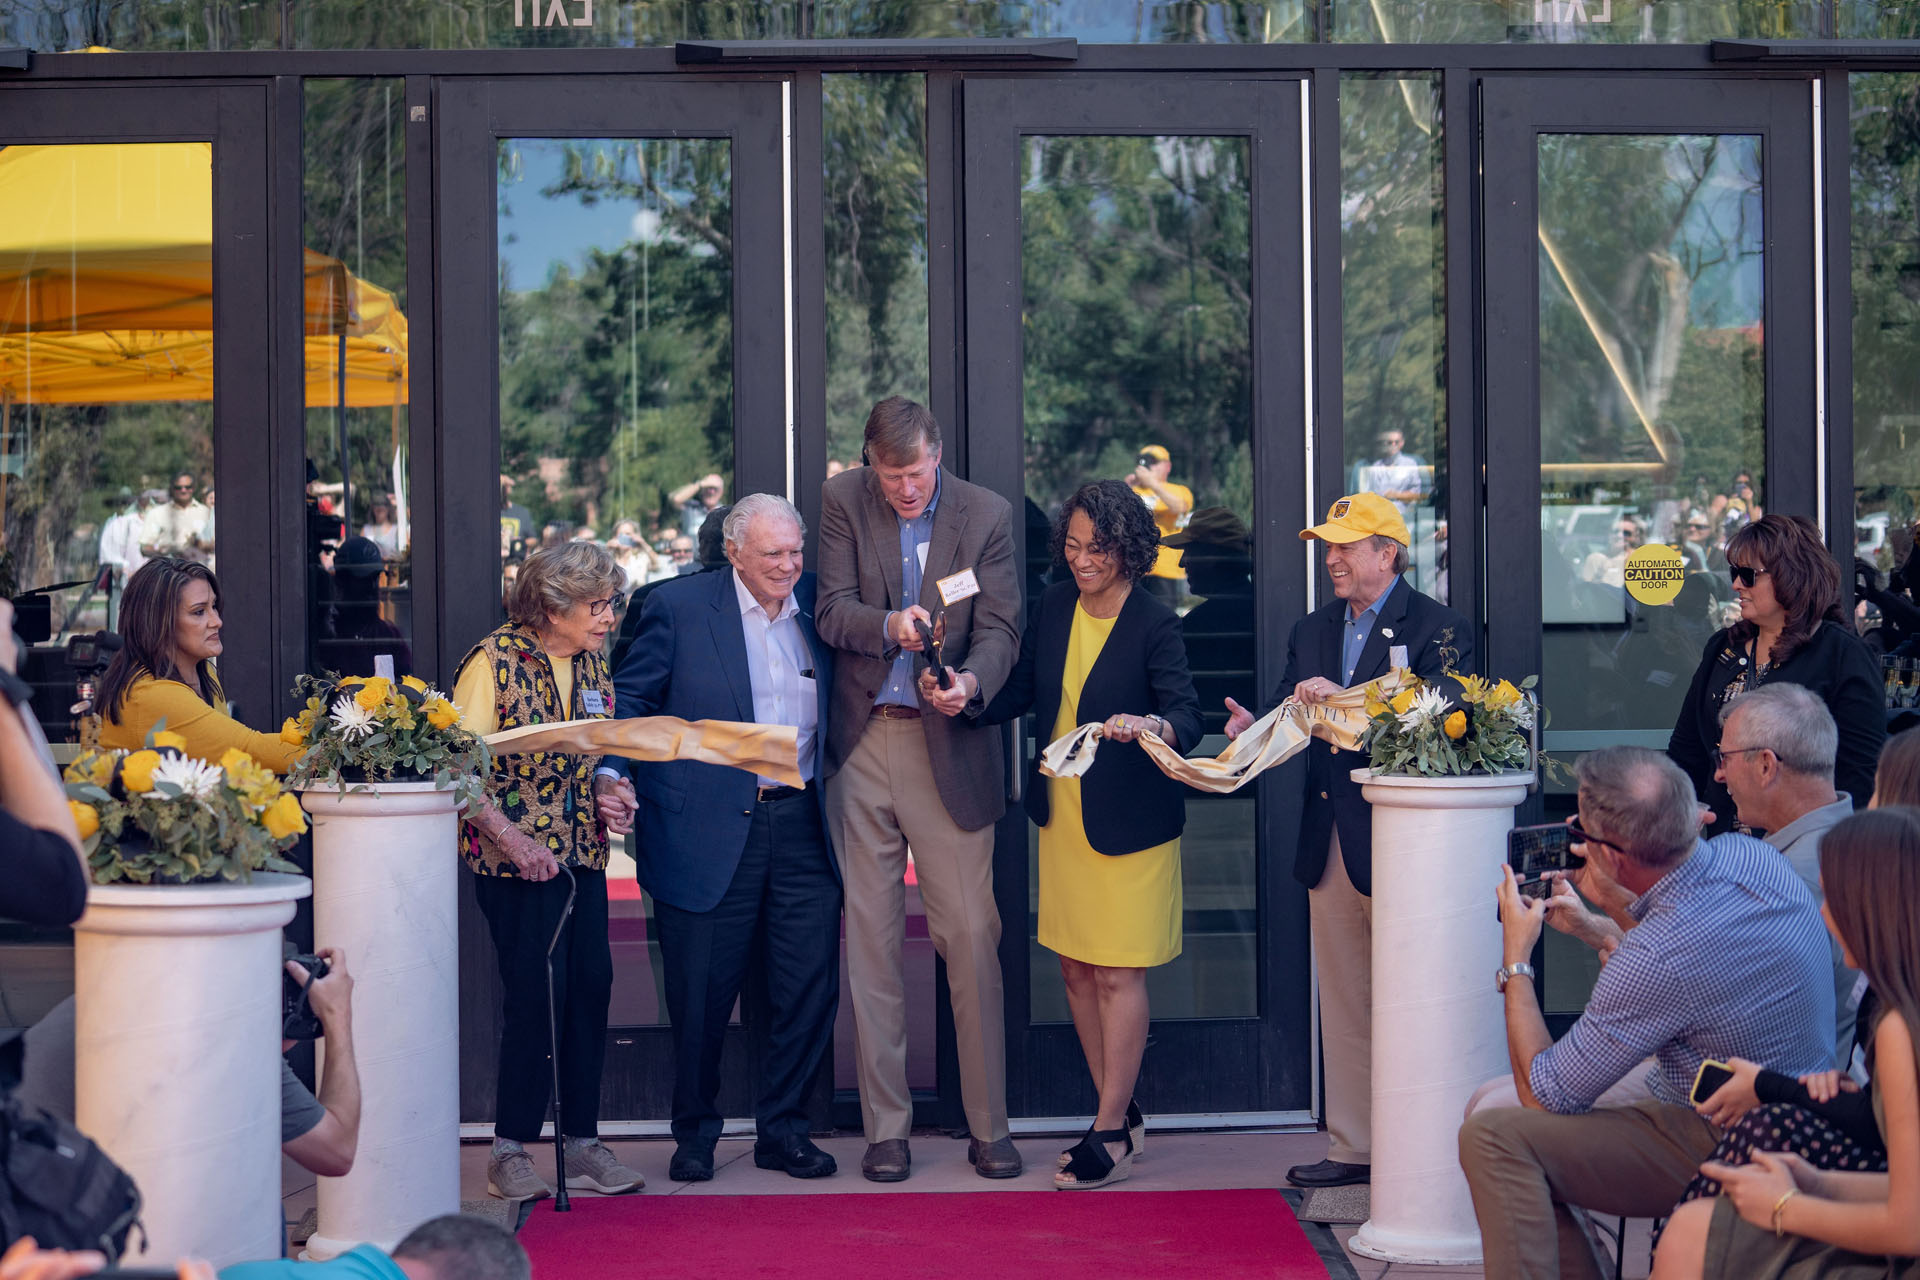 CC celebrated the opening of the new Ed Robson Arena and Yalich Student Services Center with a ribbon-cutting ceremony Saturday, Sept. 18. Left to right: Building namesakes  <strong>Barbara Yalich ’53</strong> and <strong>Ed Robson ’54</strong>, <strong>Jeff Keller ’91 P’22</strong>, chair of CC's Board of Trustees, CC President L. Song Richardson, and Colorado Springs Mayor John Suthers. Photo by Gray Warrior.